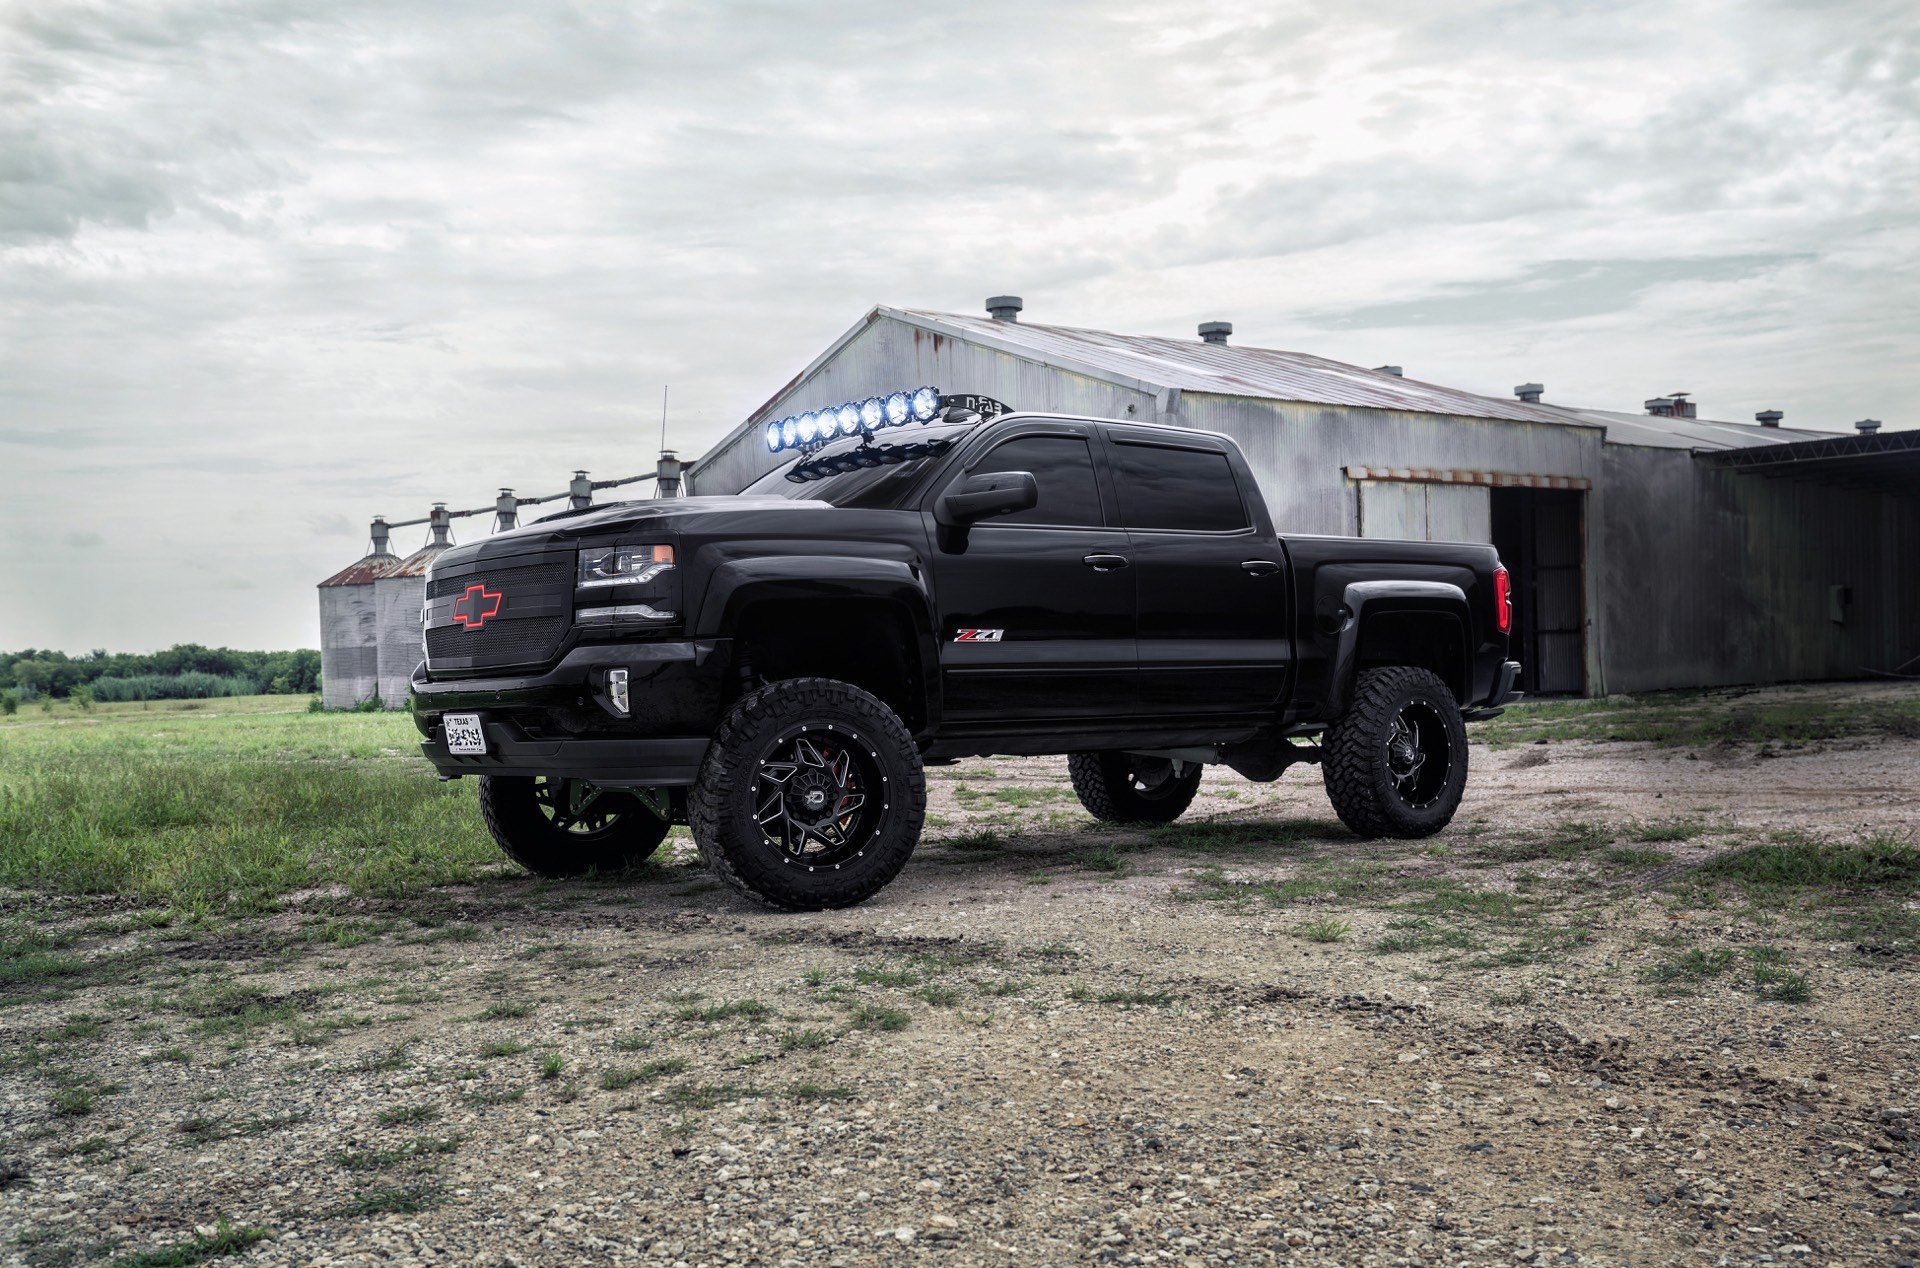 Black Lifted Chevy Silverado with KC HiLiTES Lights - Photo by Dropstar